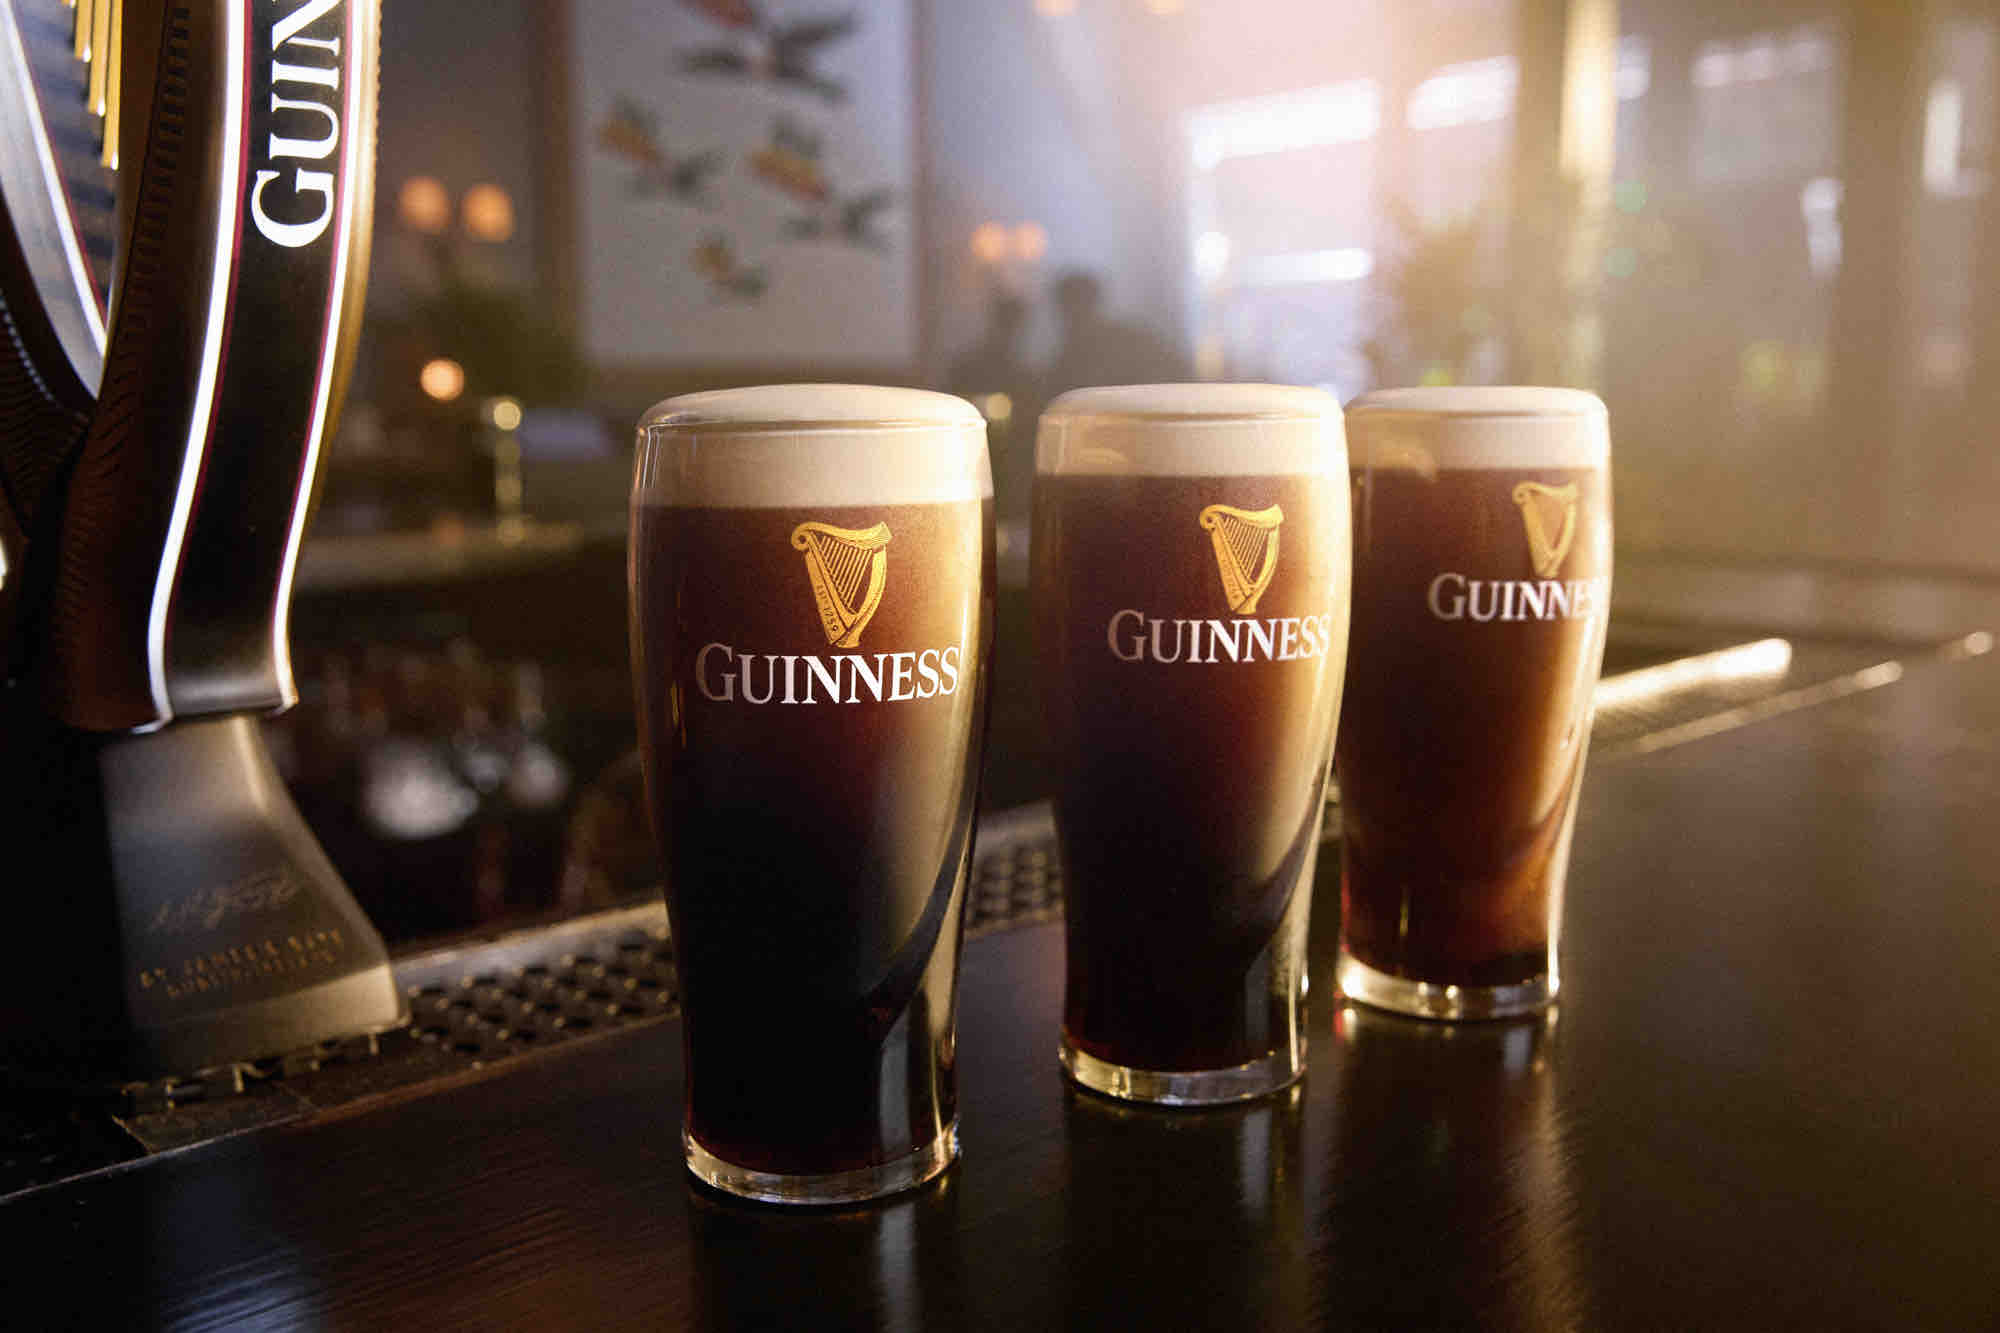 Pints of the iconic Guinness lined up for the Great Reunion Toast! (image courtesy of Guinness)